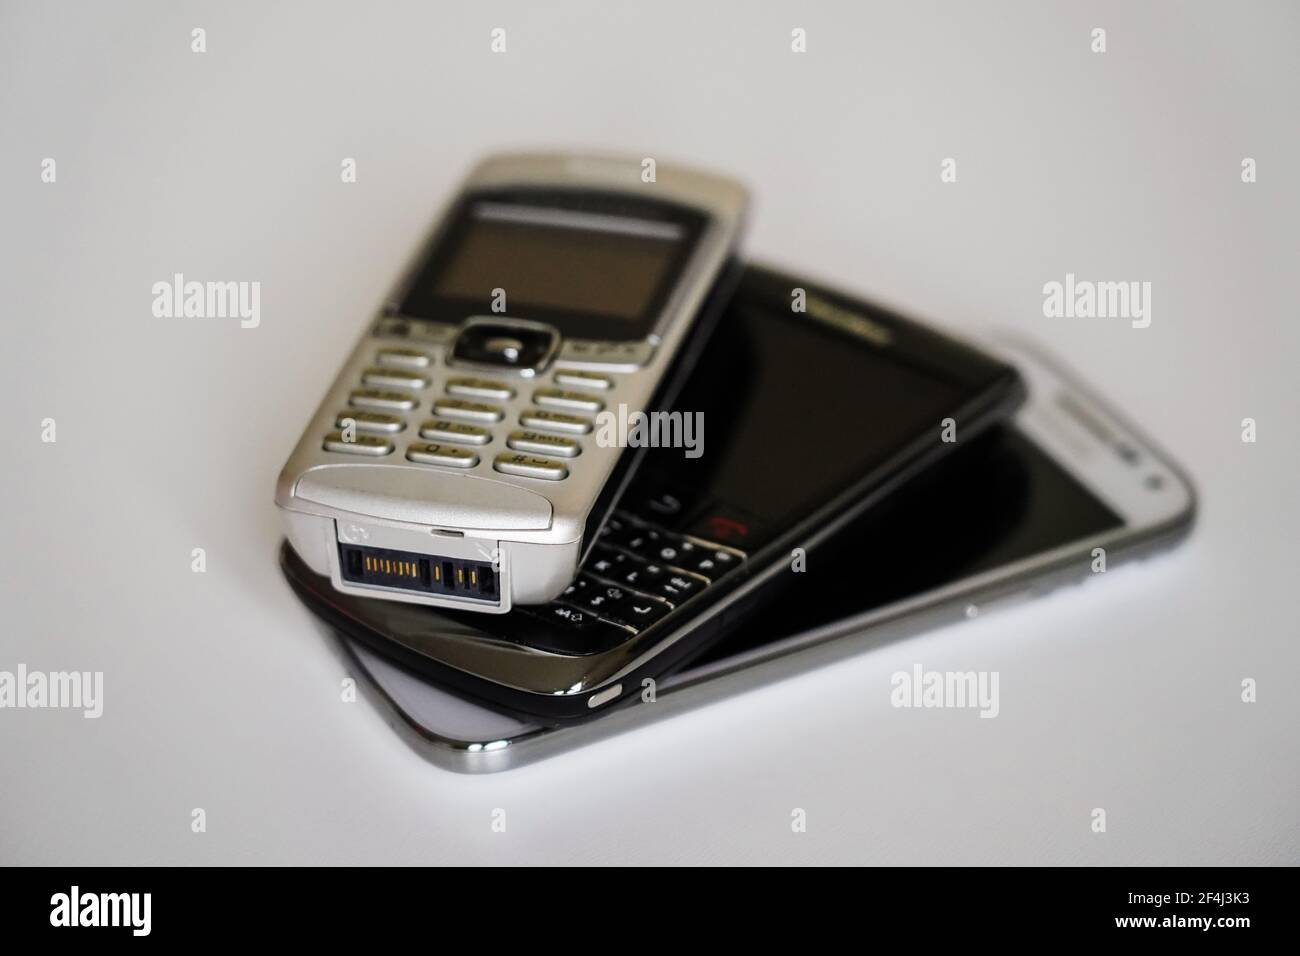 electronic waste cell phones Stock Photo